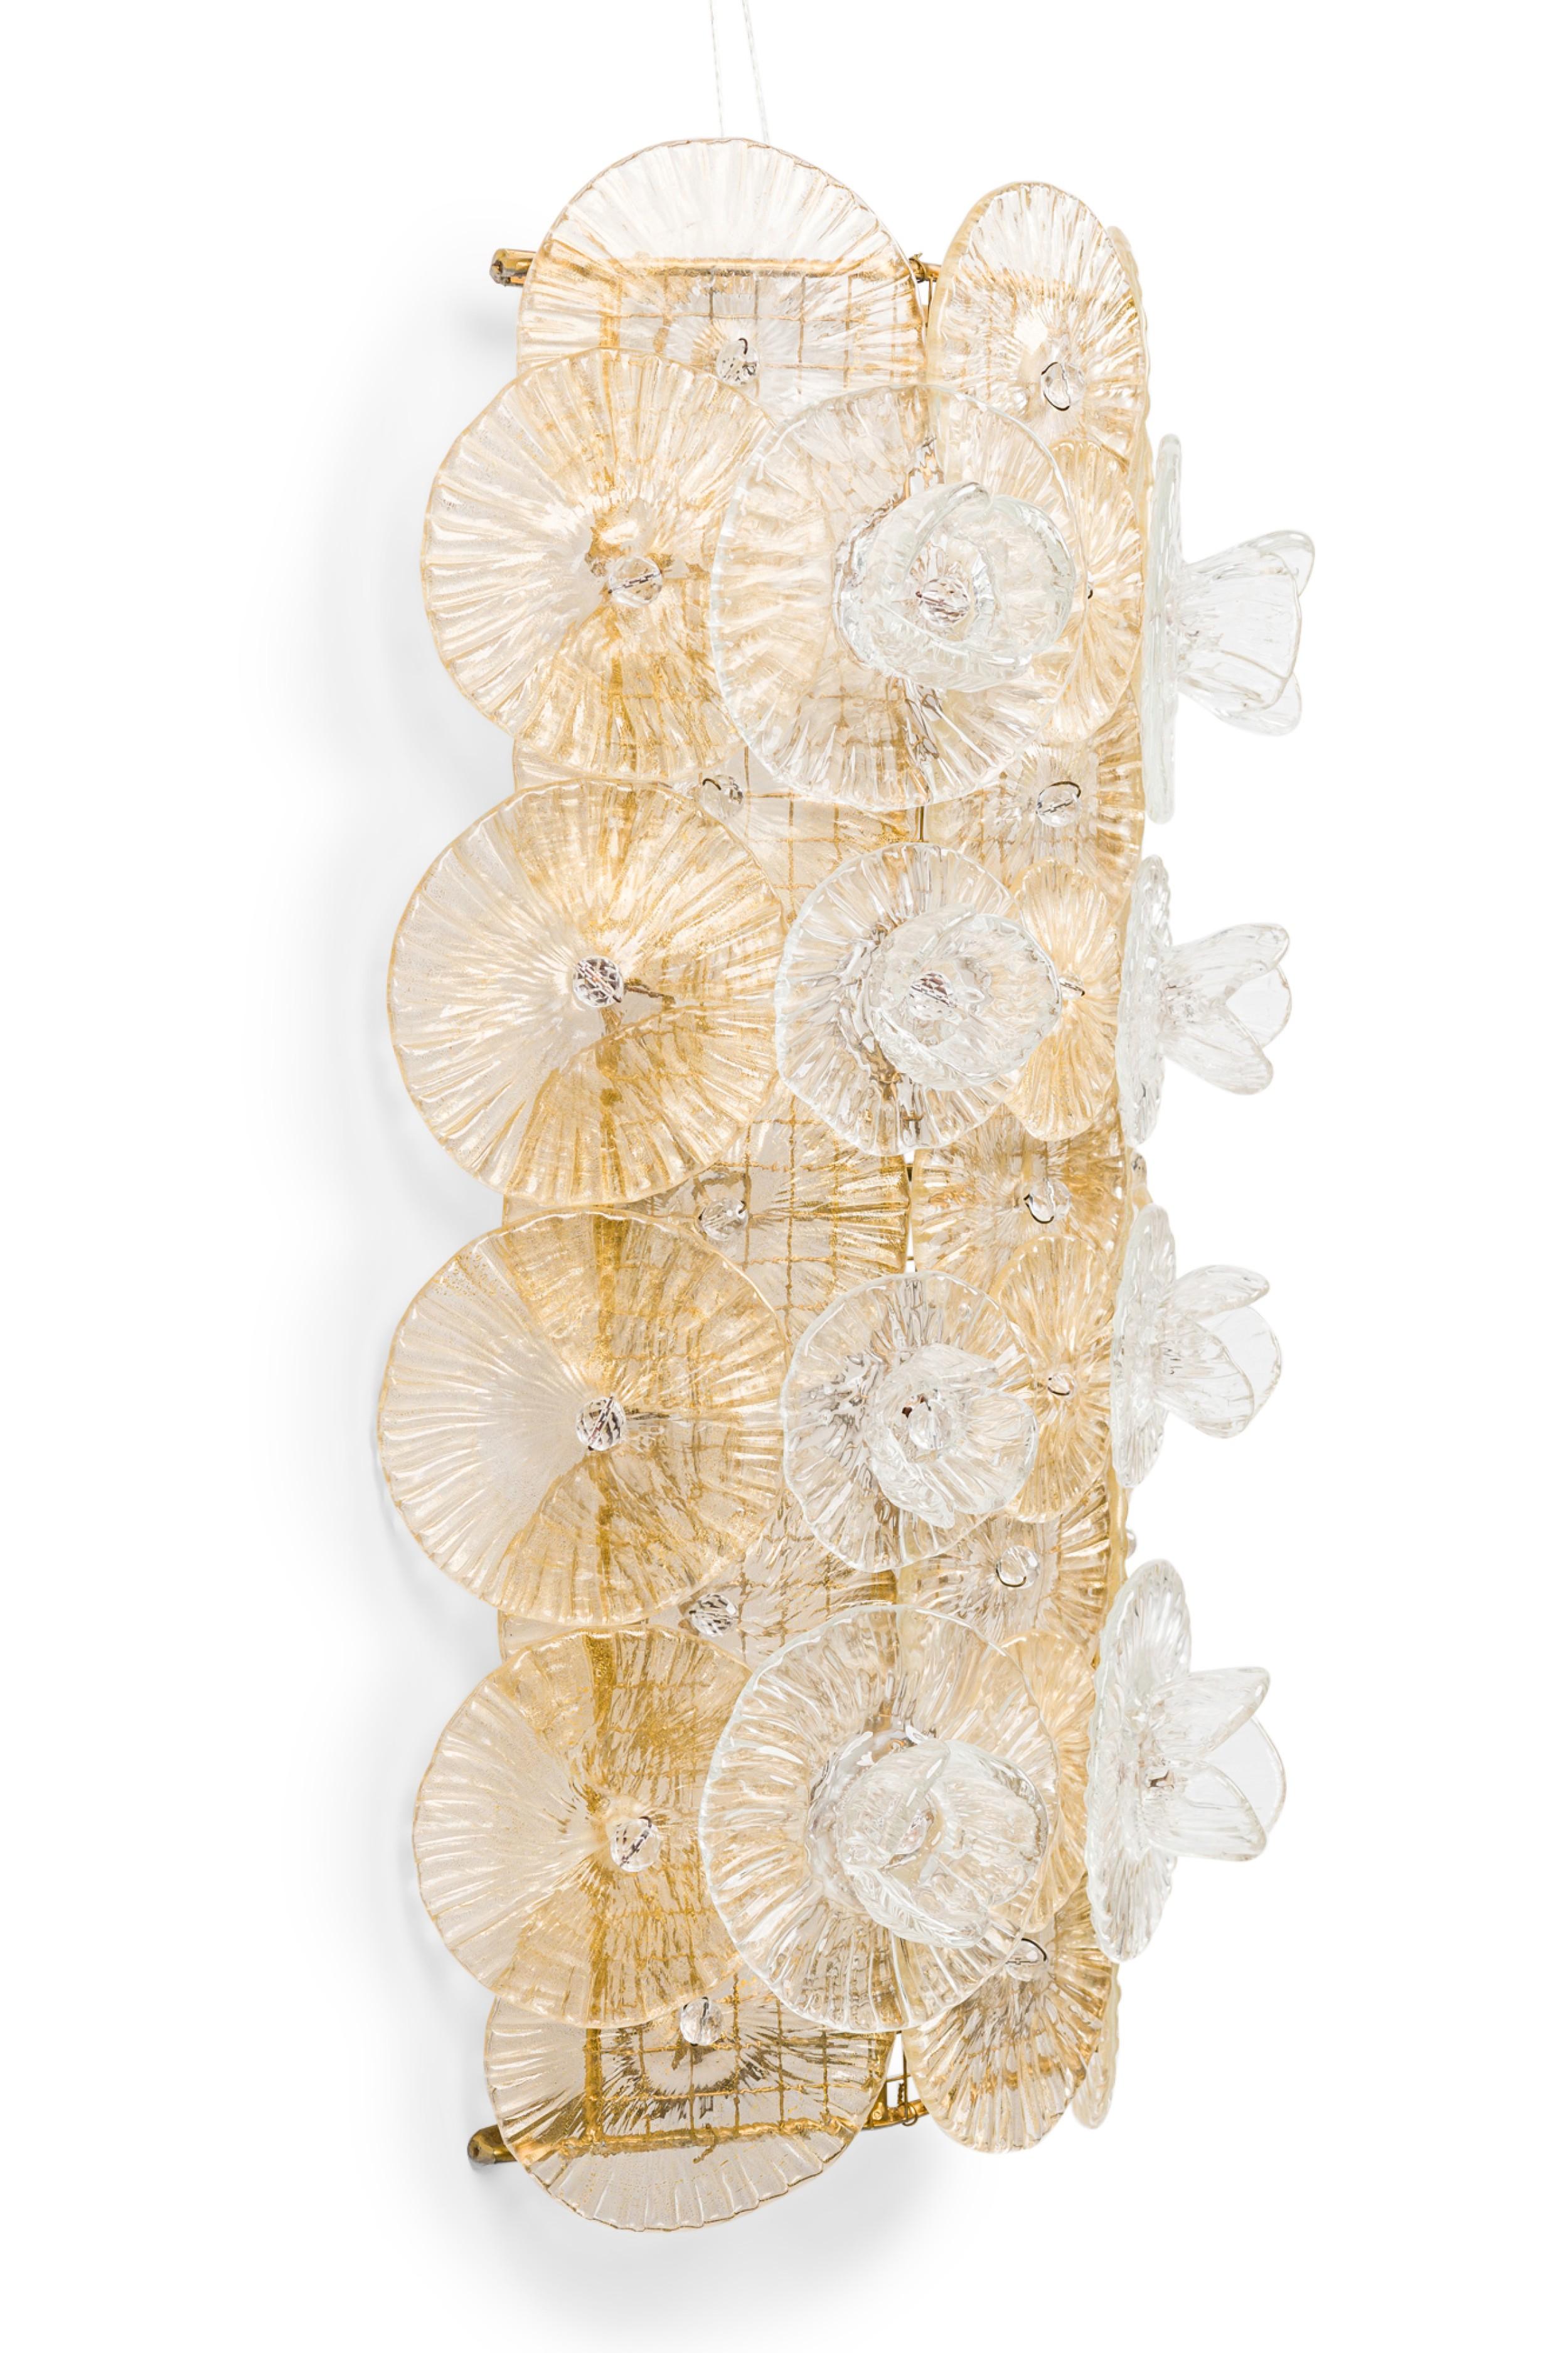 2 PAIR of Italian Mid-Century Murano style gold dustted and clear glass wall sconce covered with leaves and flowers attached to a wire frame (PRICED PER PAIR)
